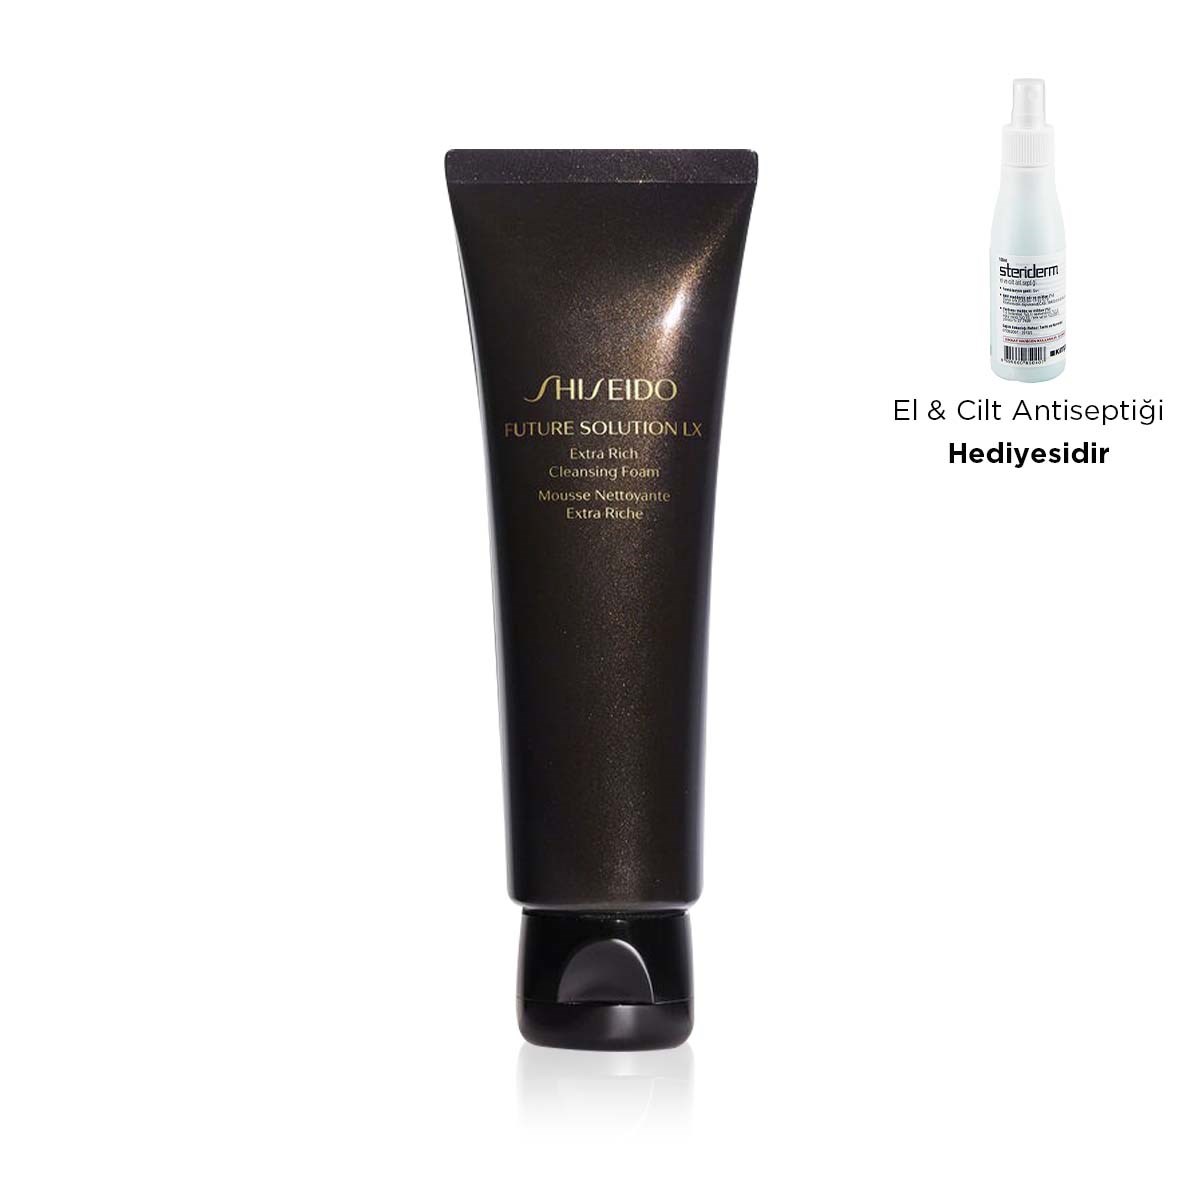 NEW FUTURE SOLUTION LX EXTRA RICH CLEANSING FOAM 1